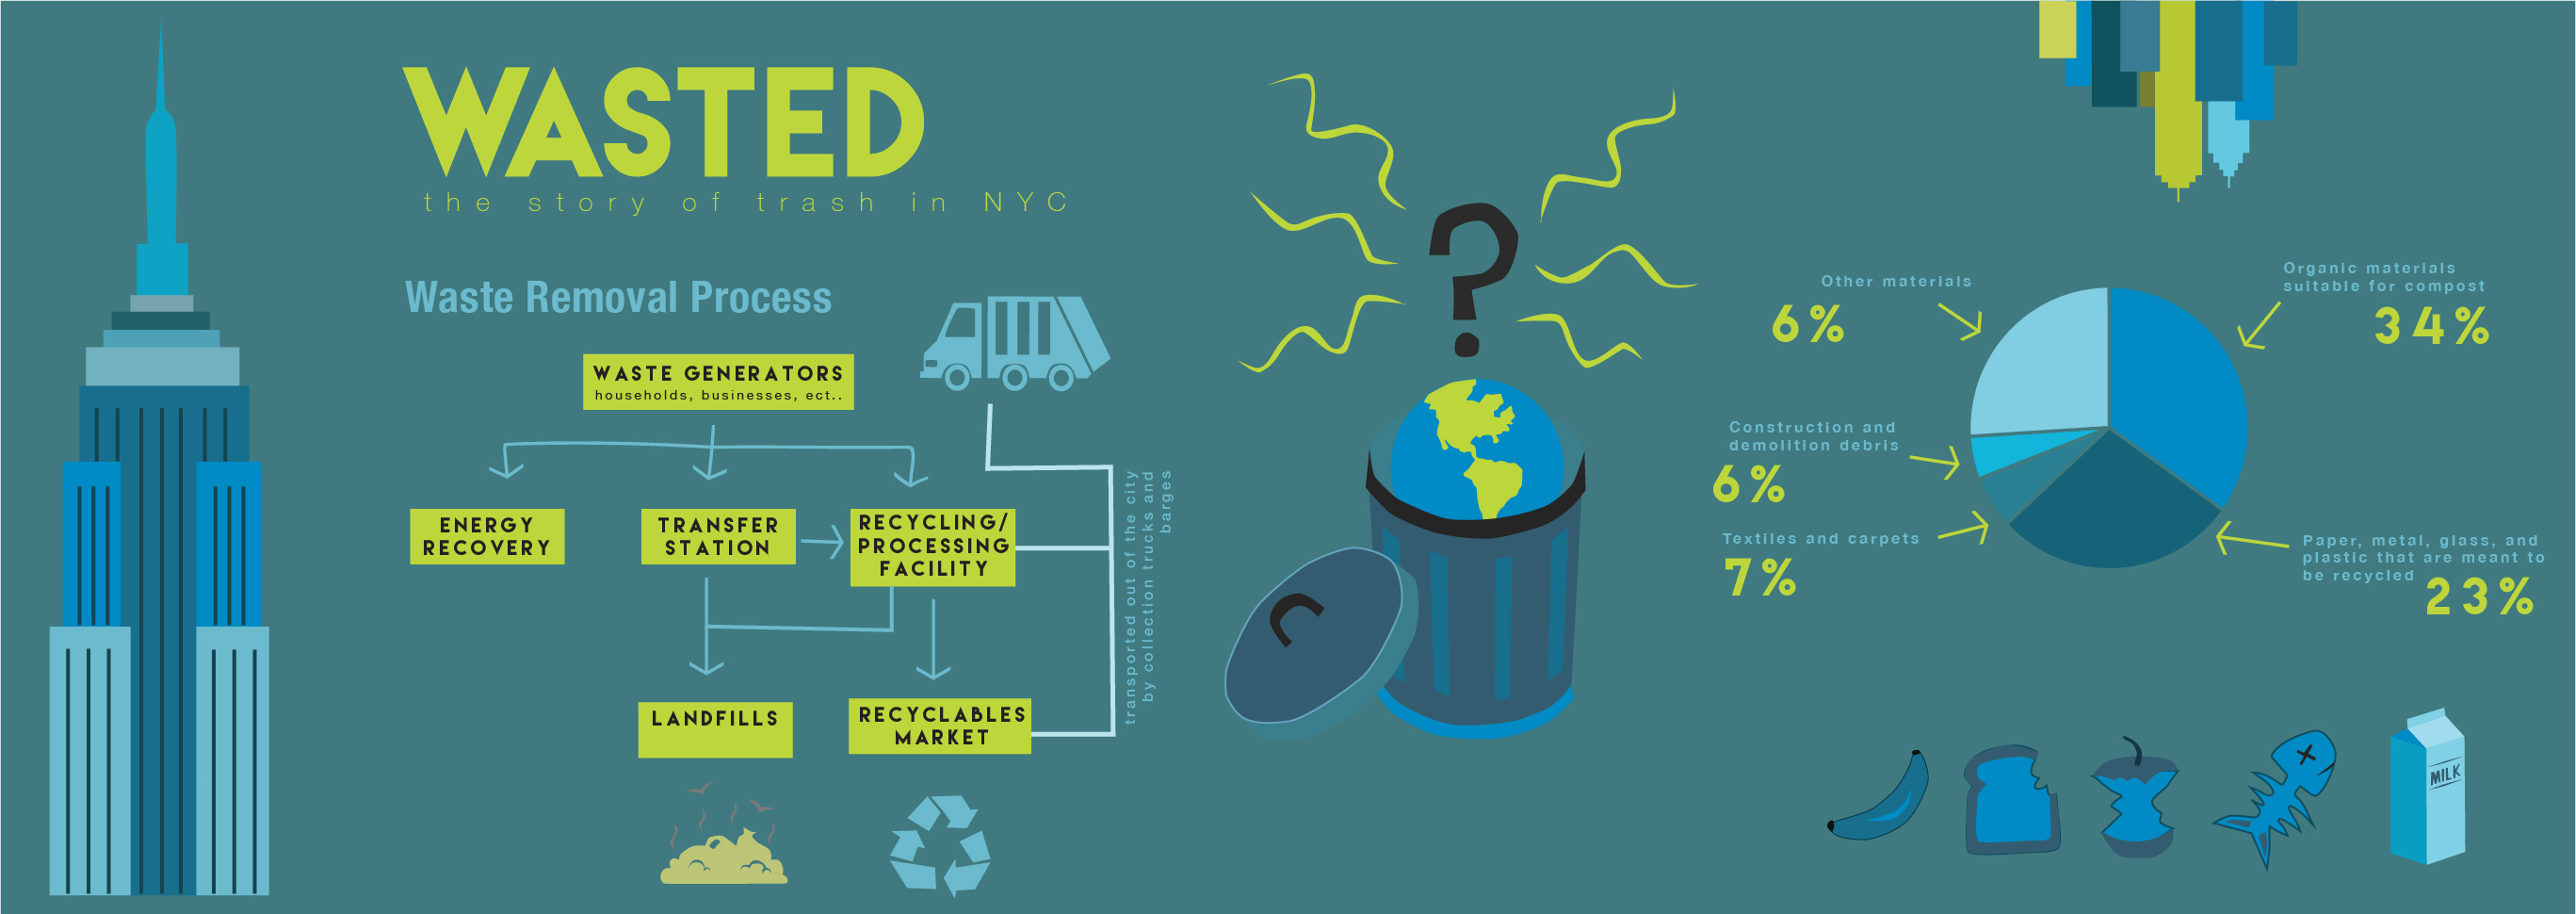 NYC Waste Infographic